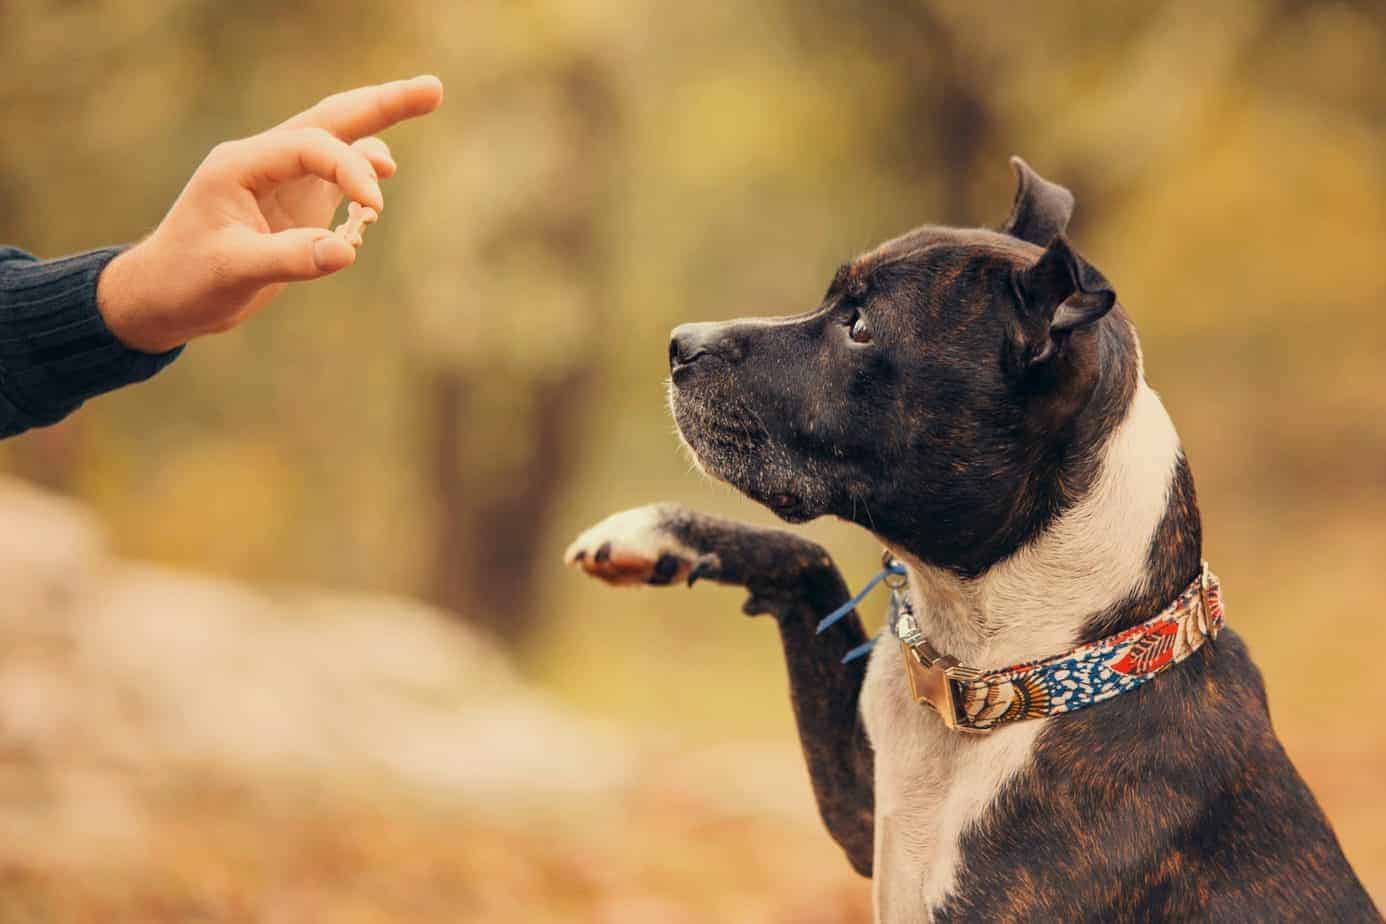 Owner uses small treat to train dog.